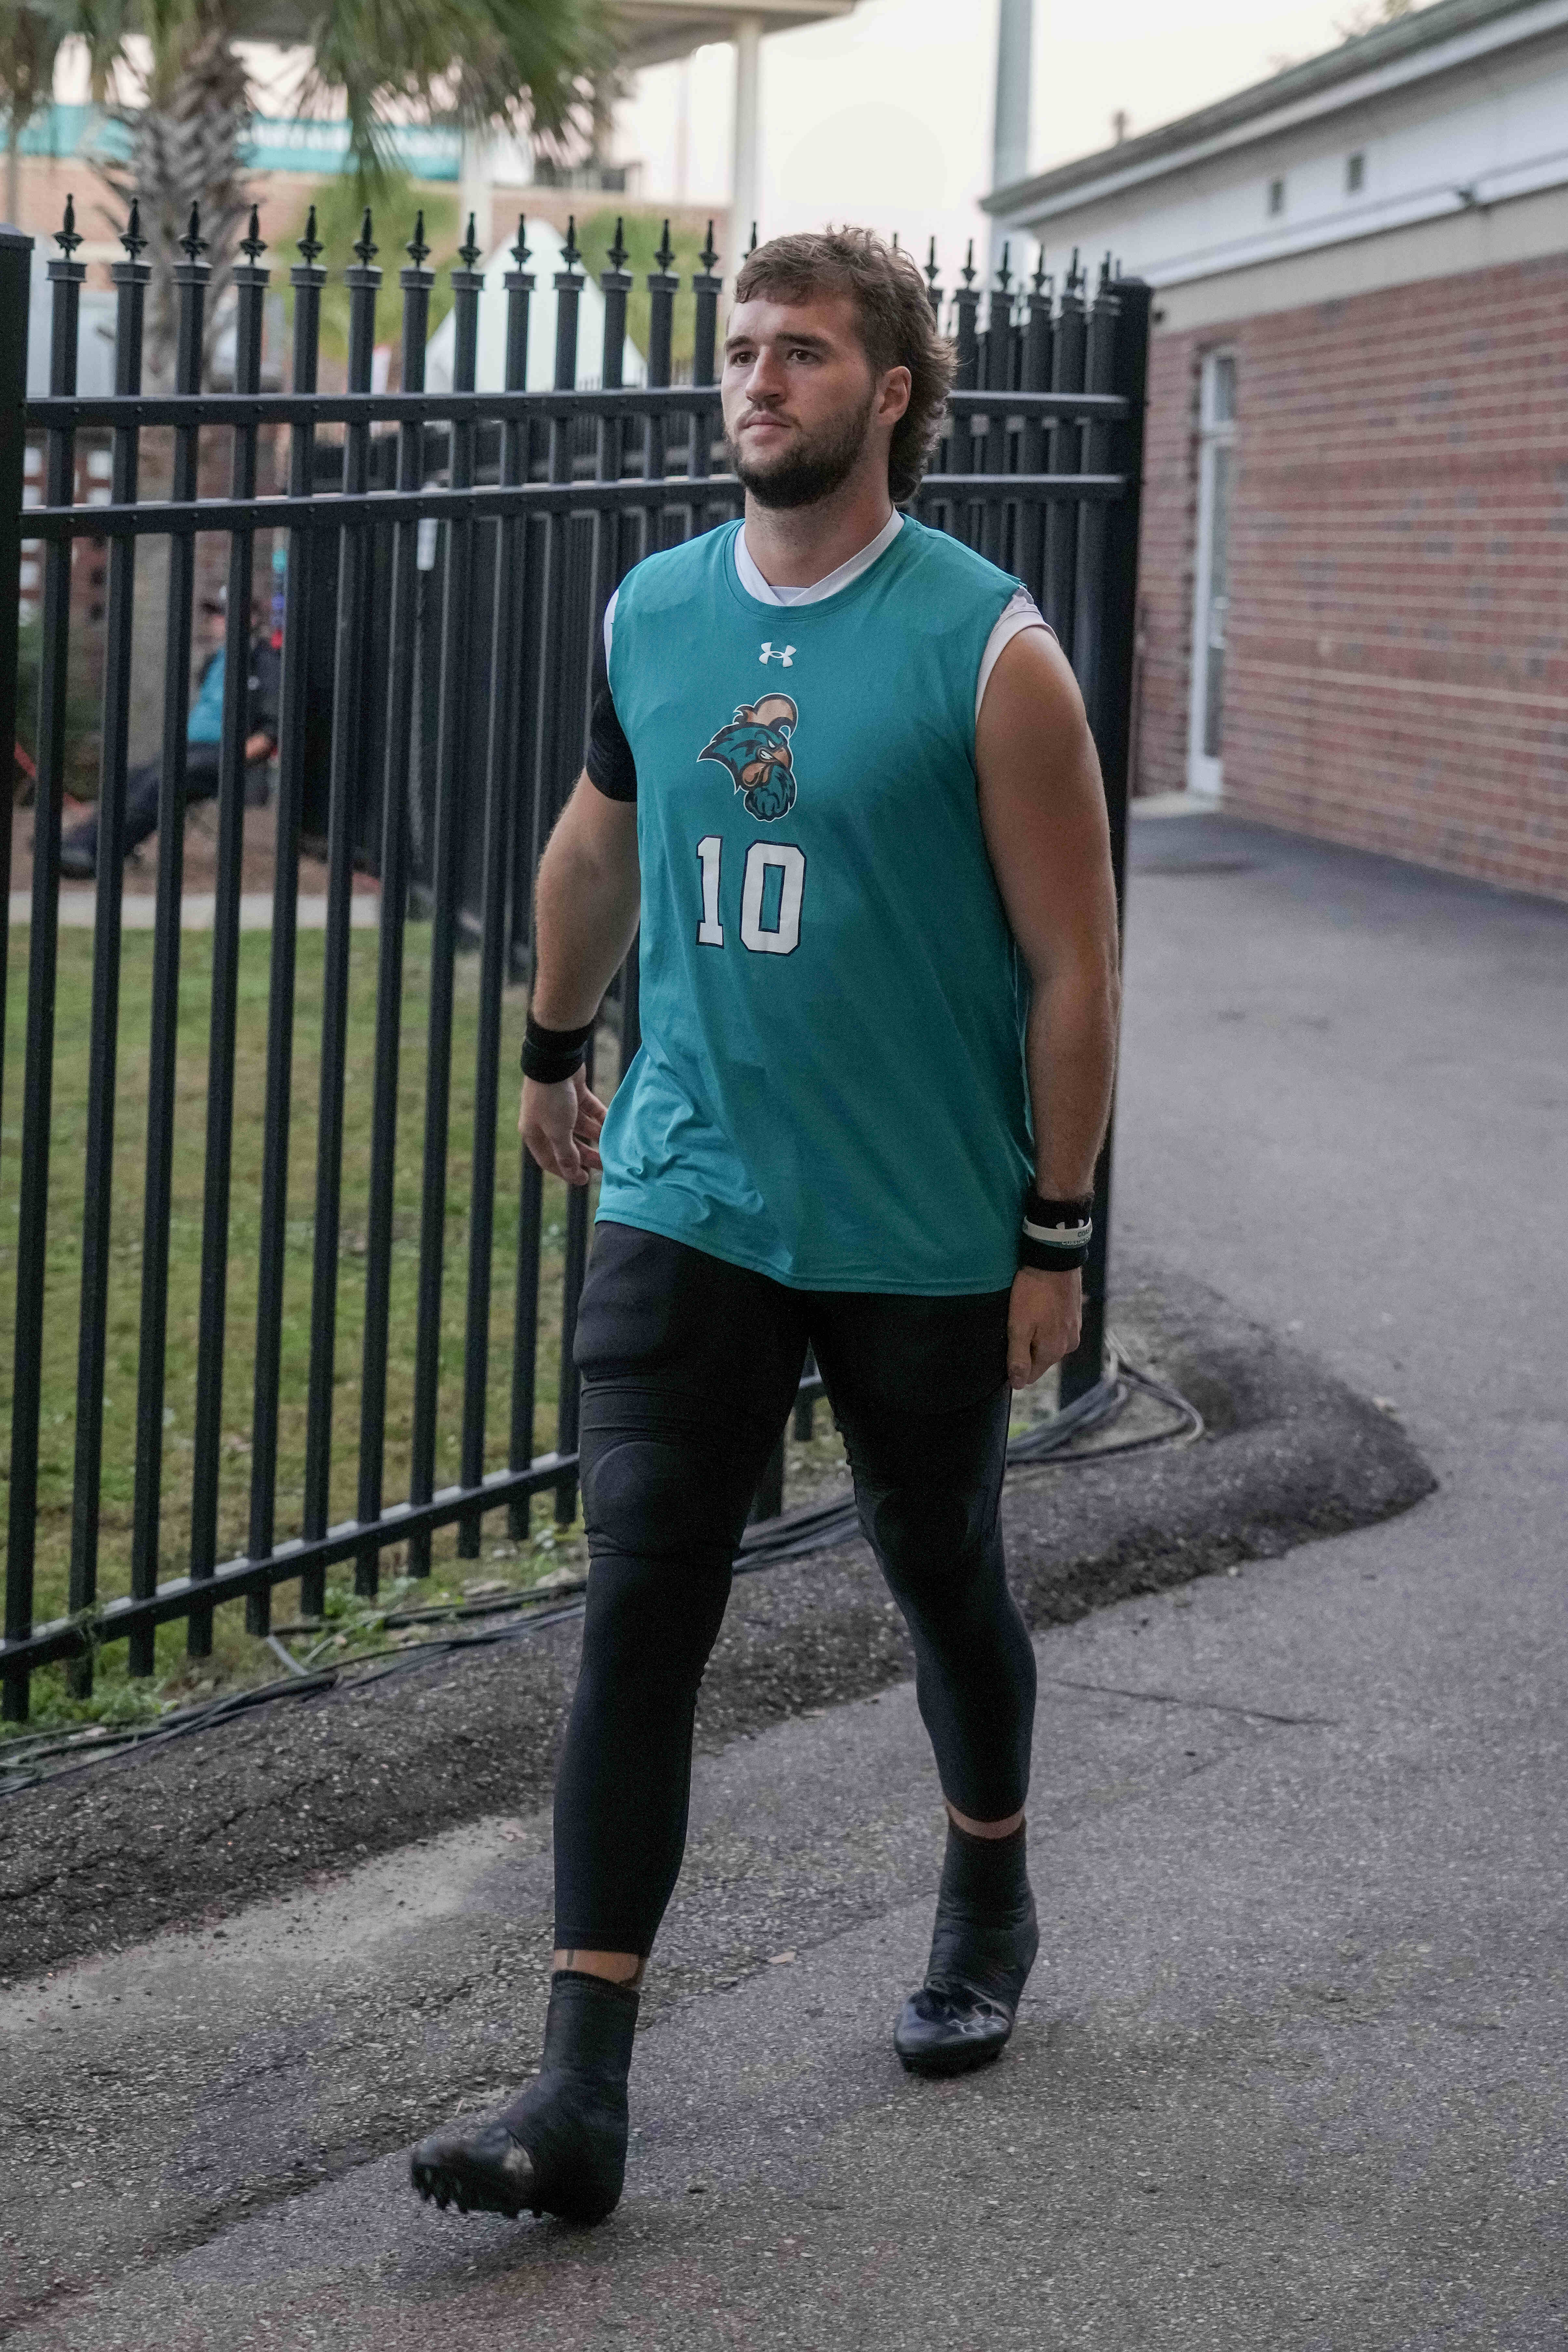 Coastal Carolina Chanticleers quarterback Grayson McCall arrives prior to a game against the Appalachian State Mountaineers at Brooks Stadium.